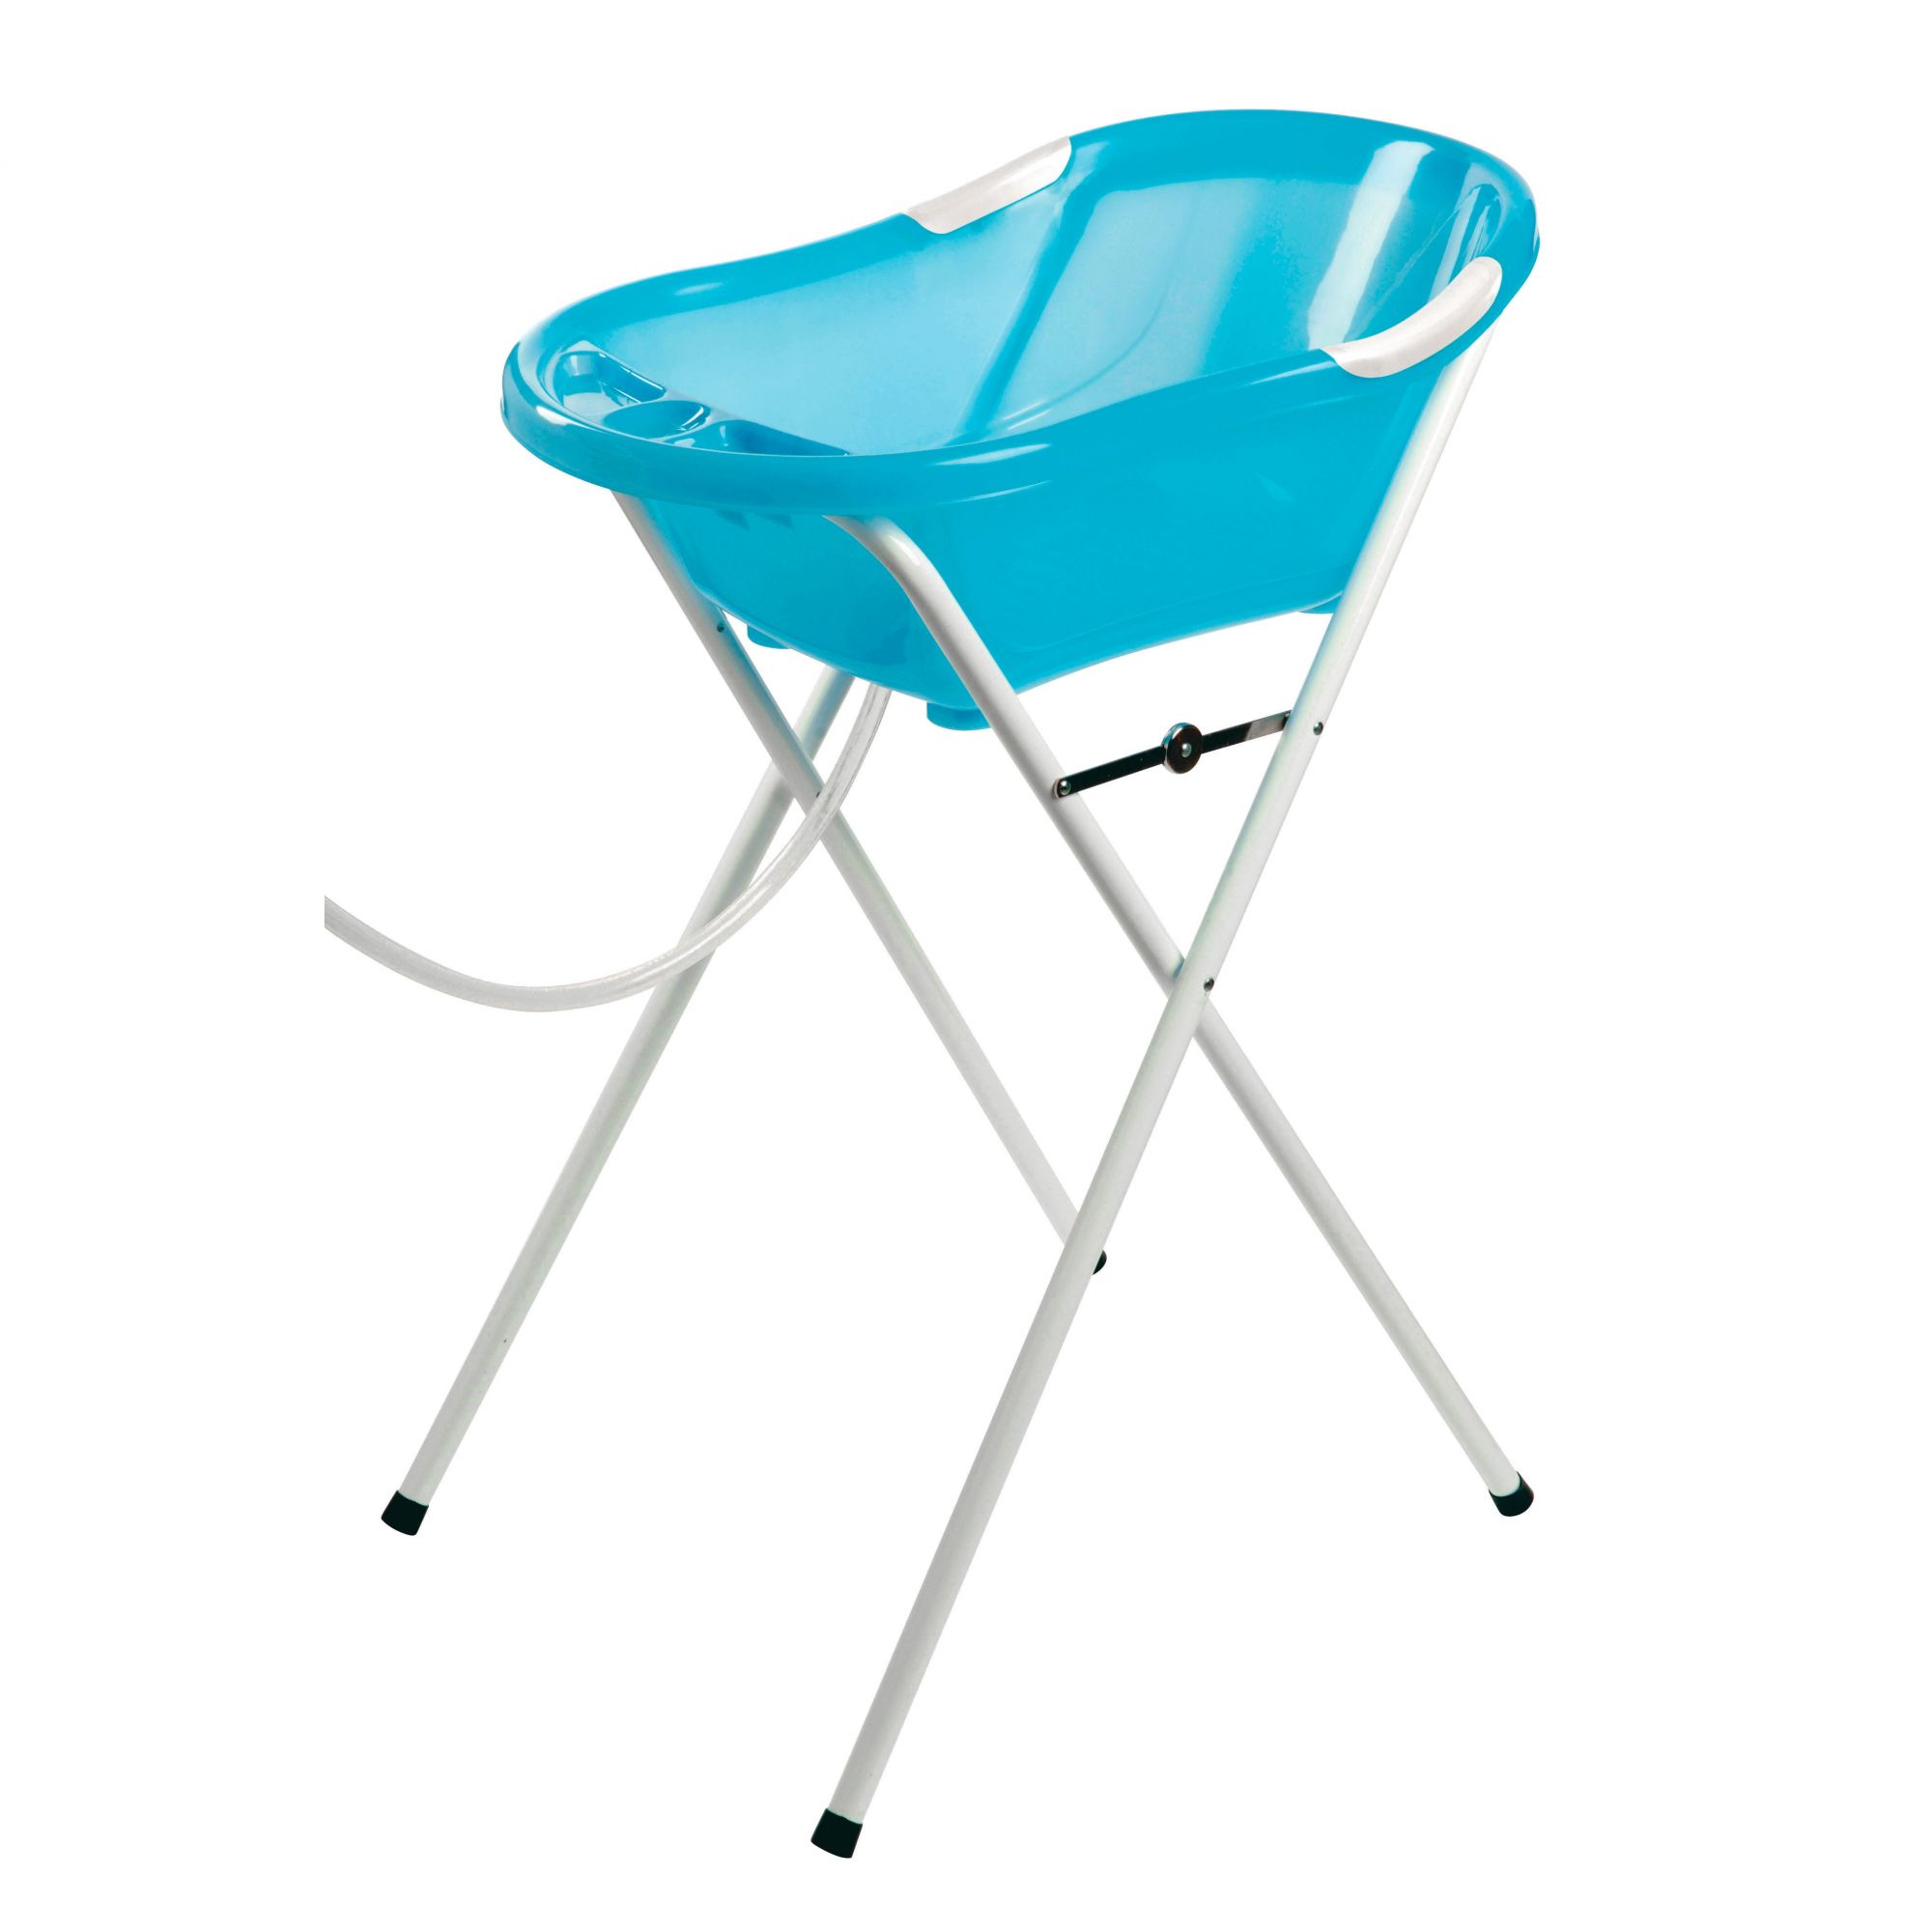 Dbb Remond Baignoire Bebe Turquoise Avec Vidange Support A Pied Made In Bebe